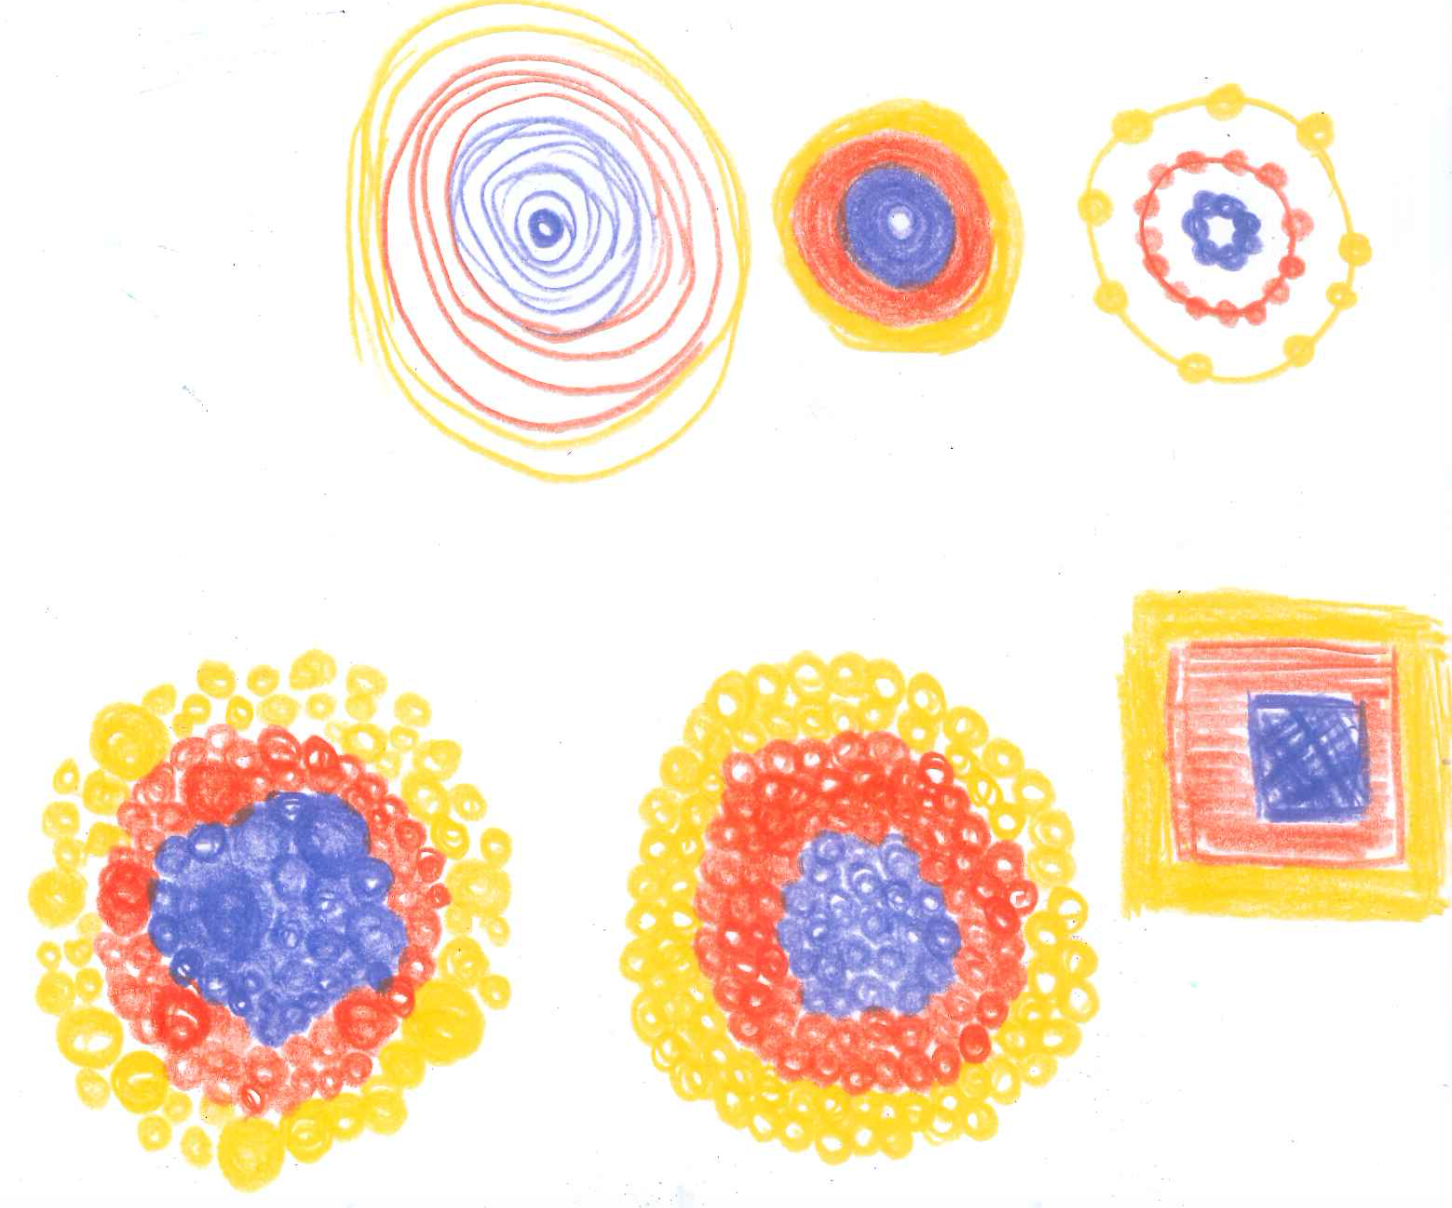 sketch of concentric visualizations